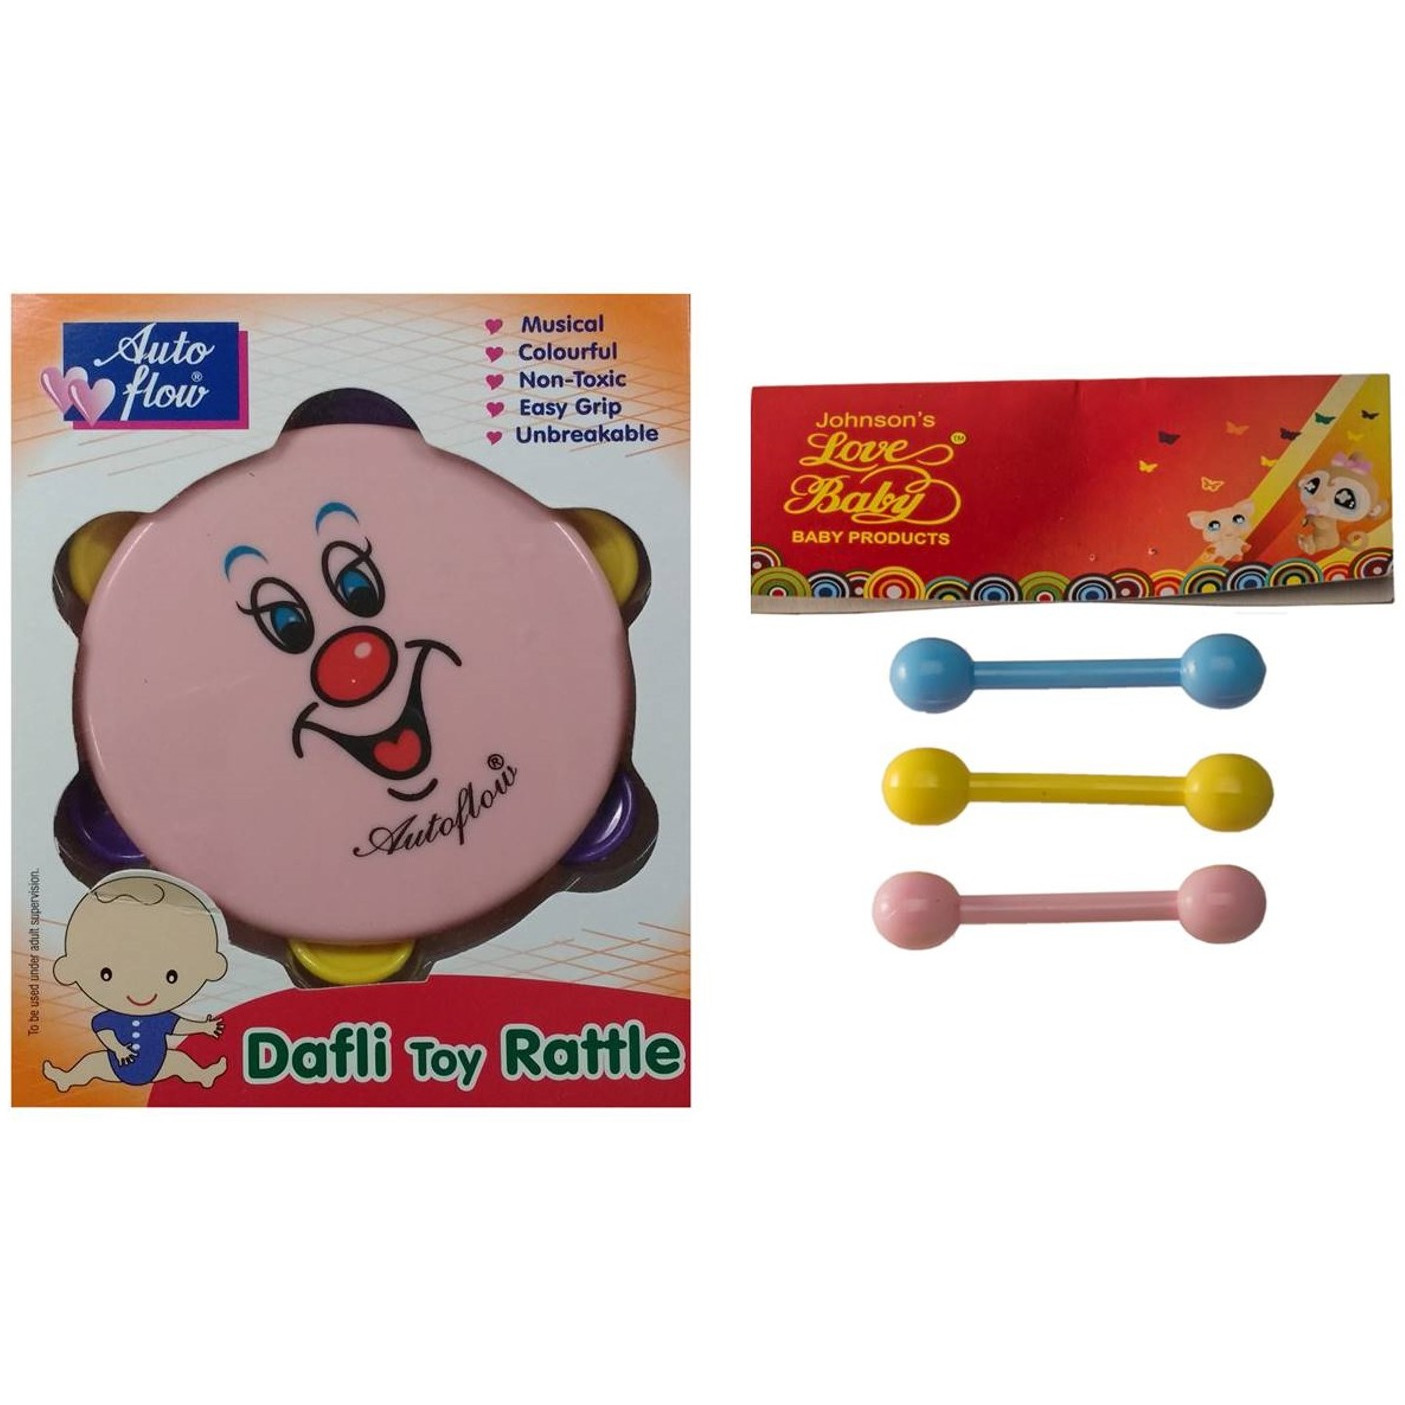 Auto Flow Rattle Toy - Dafli Toy - BT26 Combo Pink